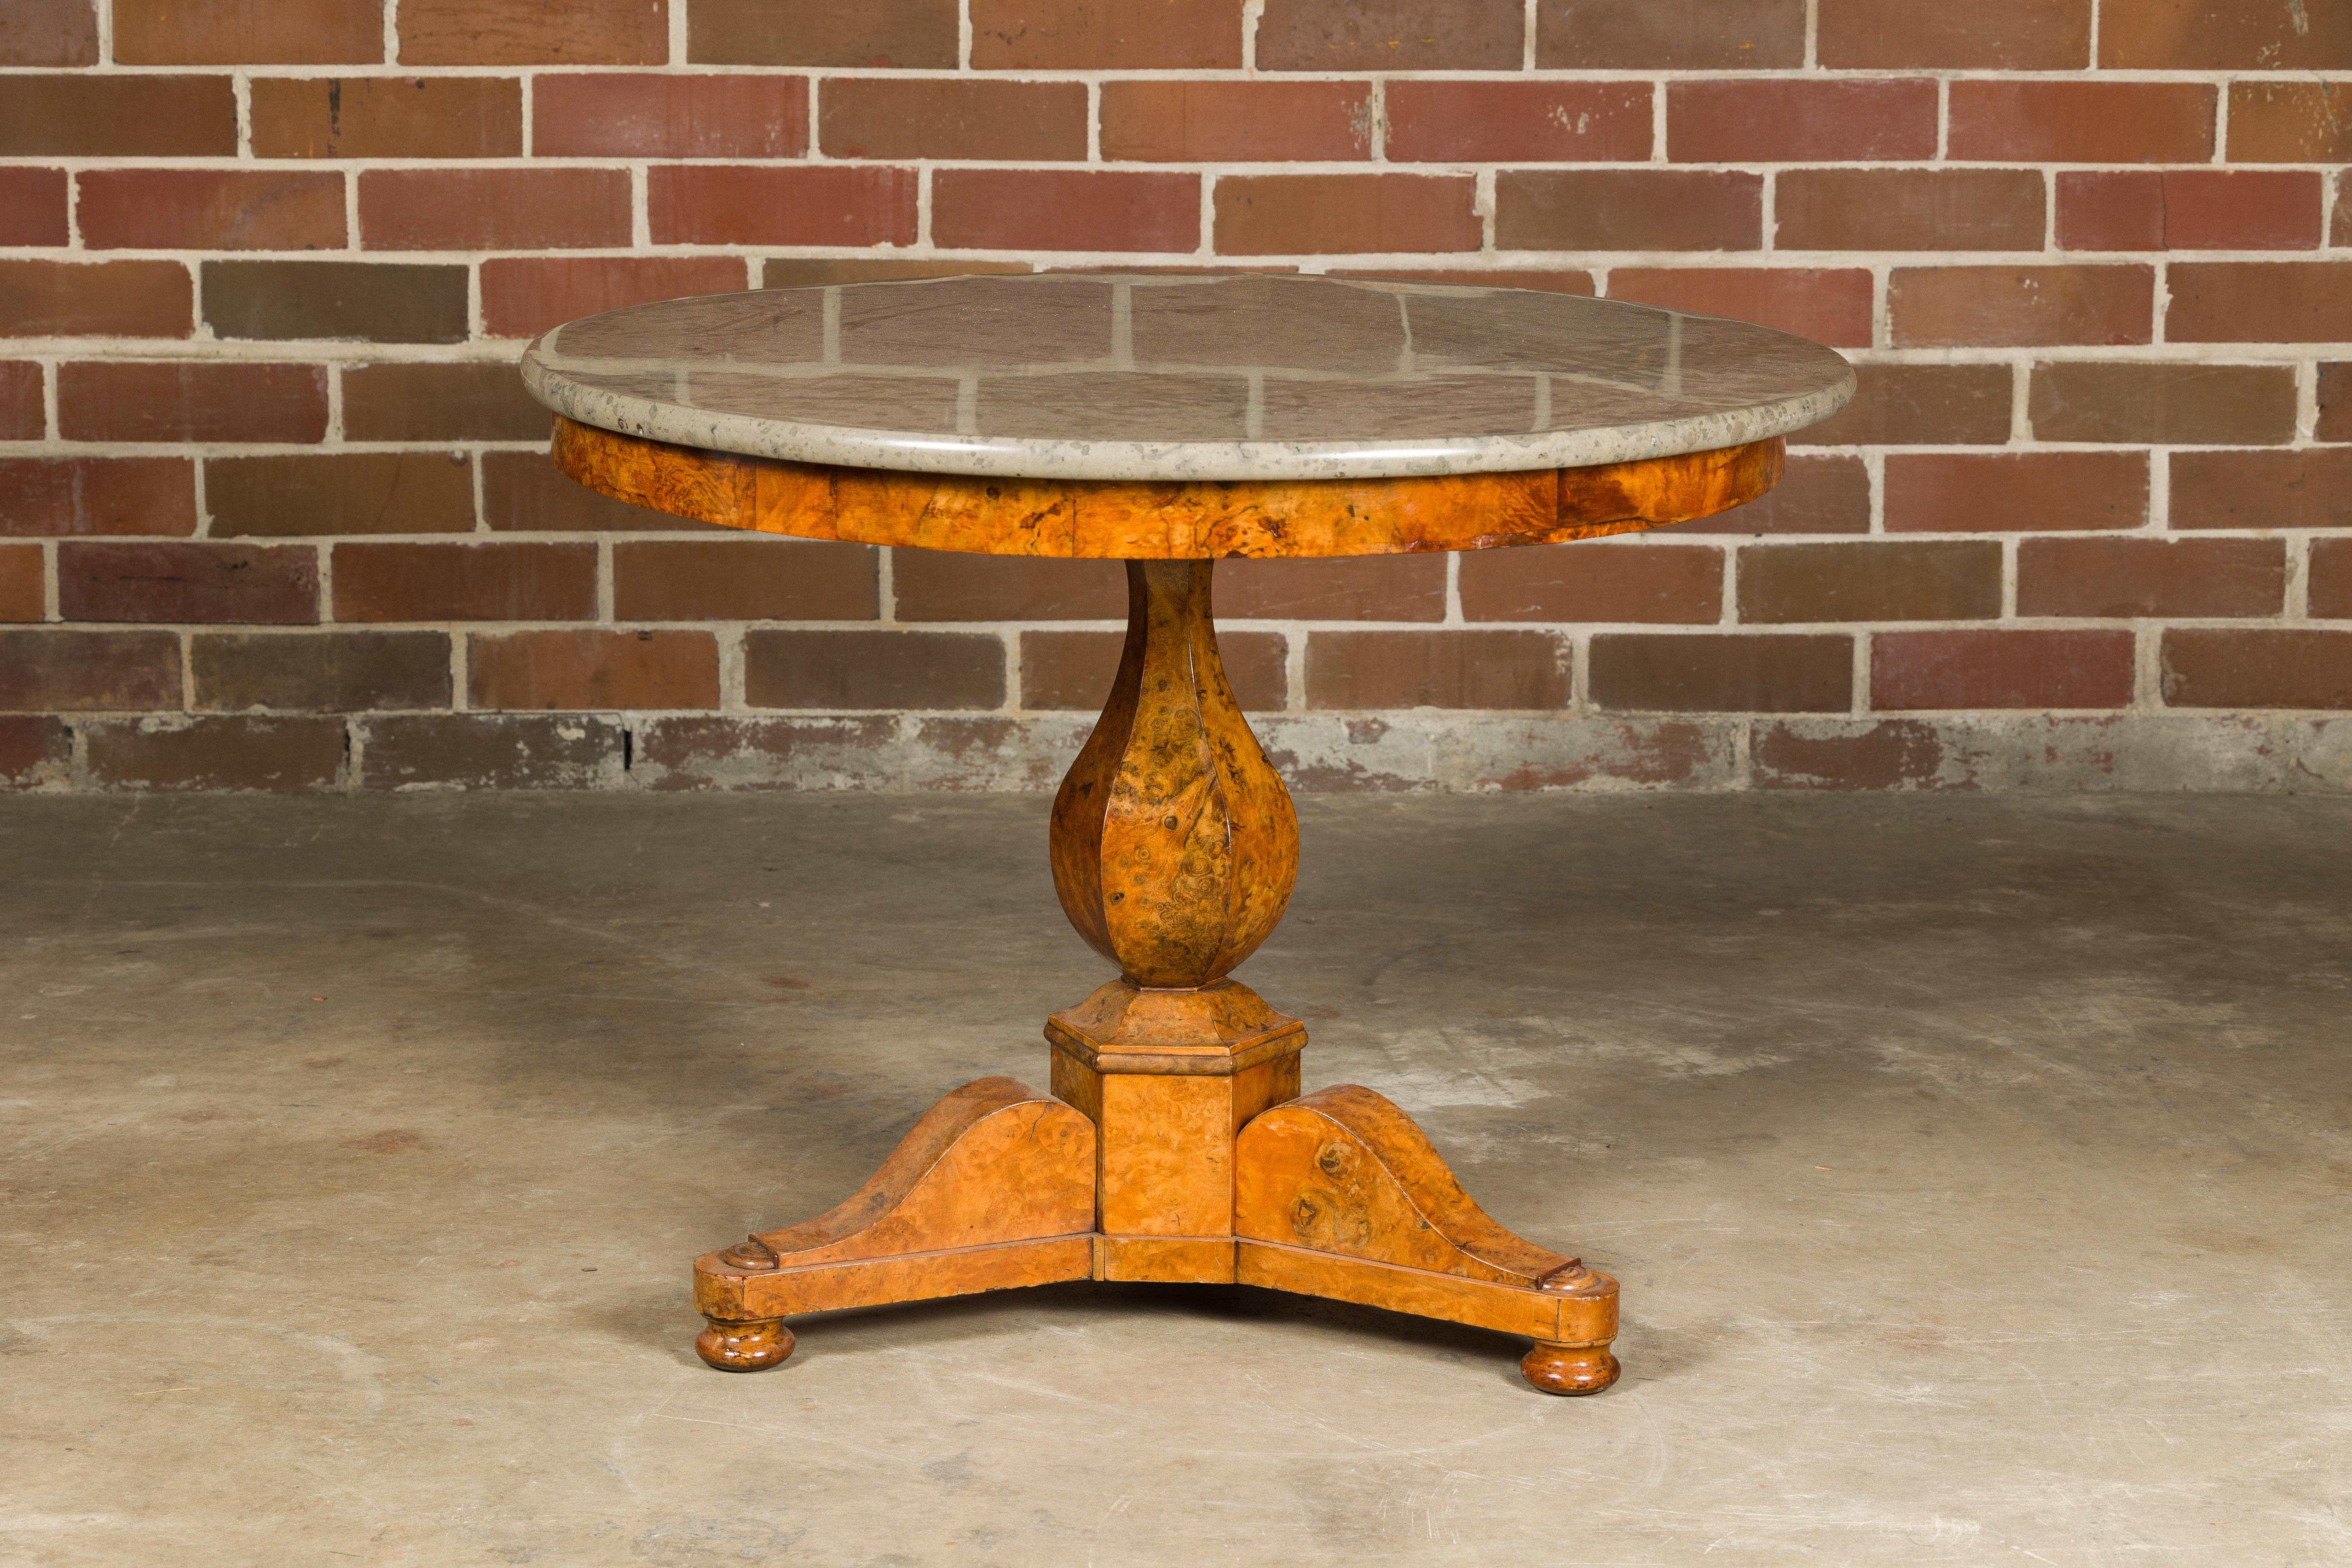 A French Empire period walnut table from the 19th century with circular marble top, pedestal and tripod base. Evoke the elegance of 19th-century France with this resplendent French Empire period walnut table. This masterpiece is a blend of artistry